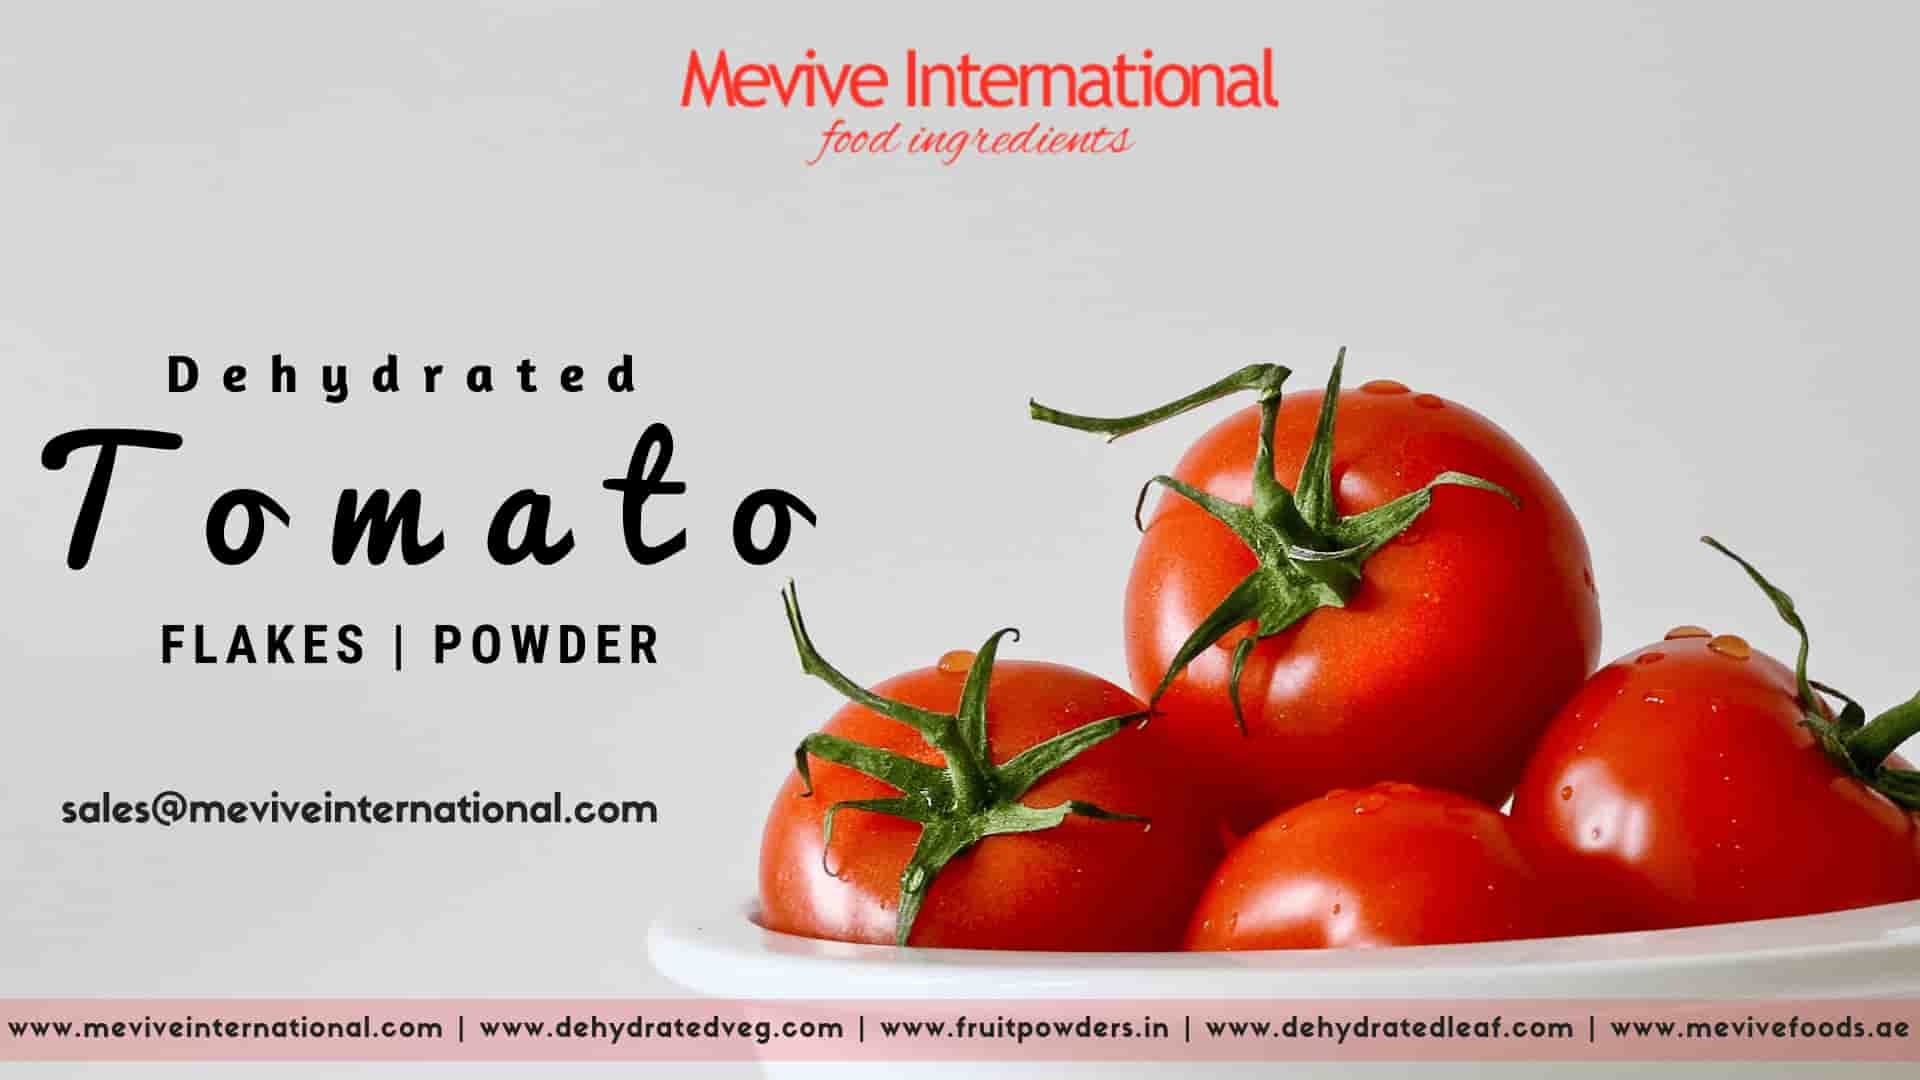 dehydrated tomato flakes and powder supplier in india 